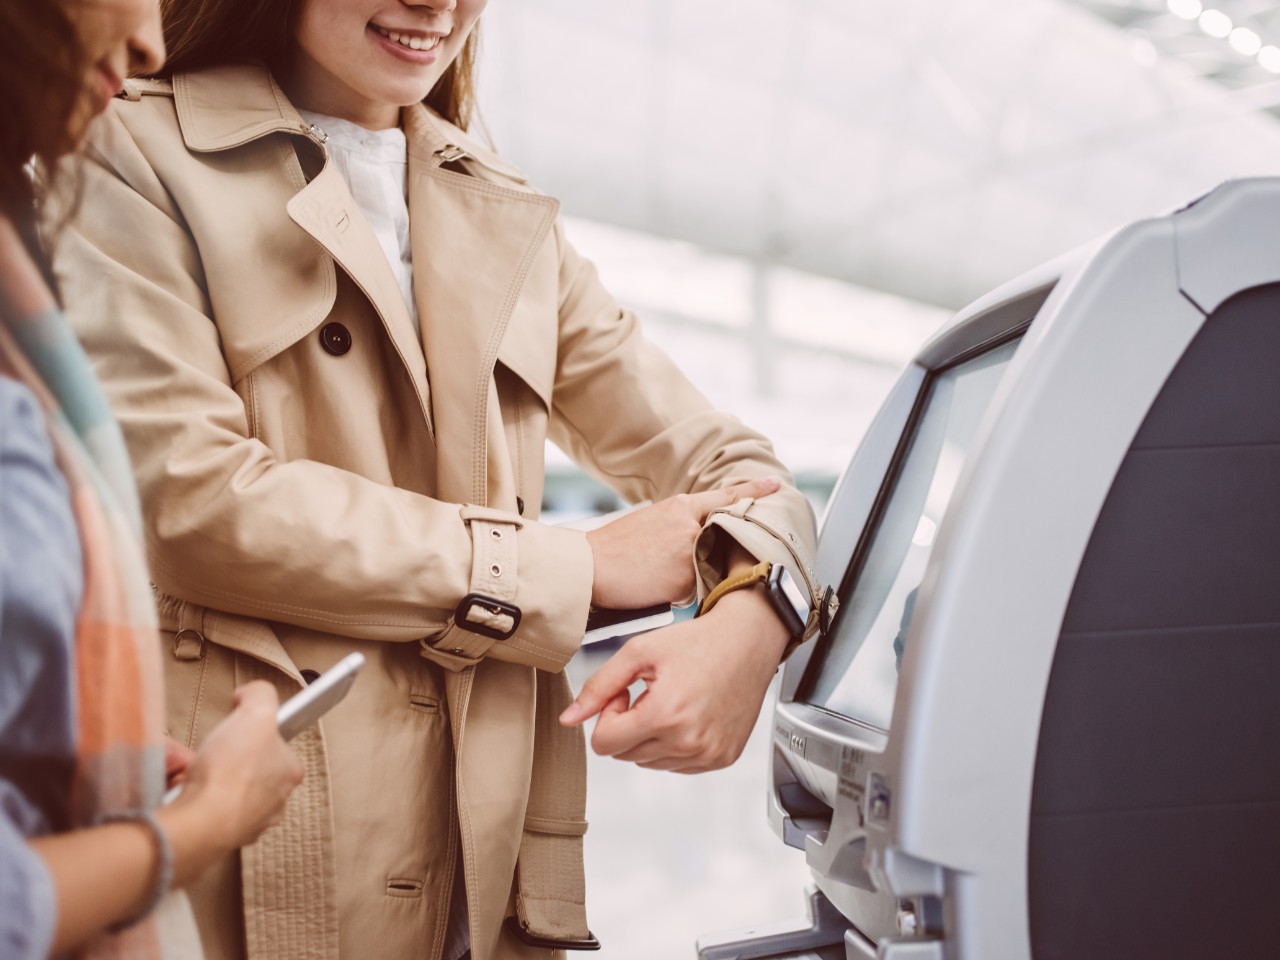 Two women connecting the smart watch to the self-check in kiosk at the airport